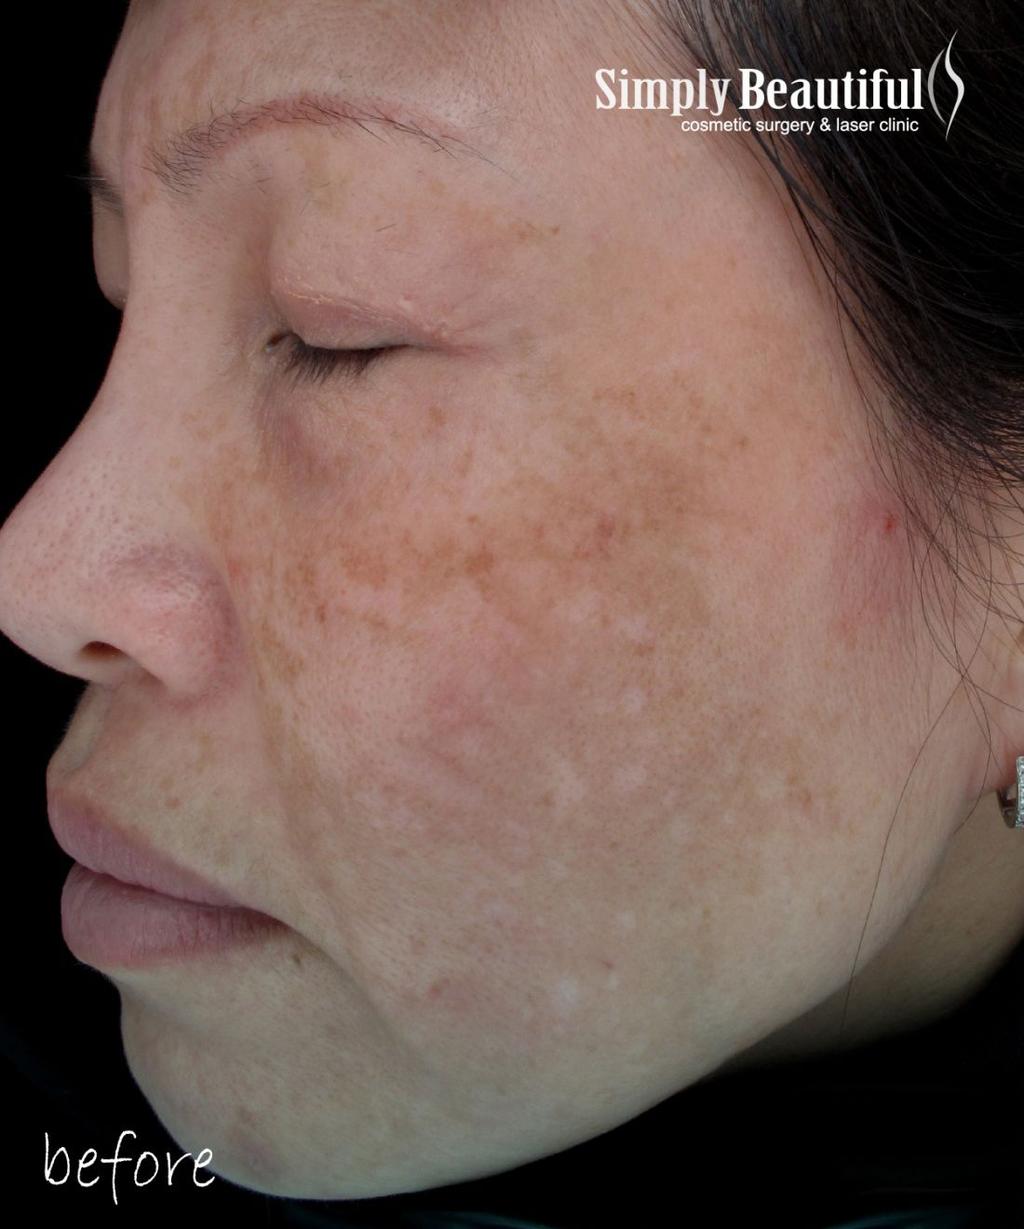 Why treat pigmentation disorder in Asians? My grandma told me.